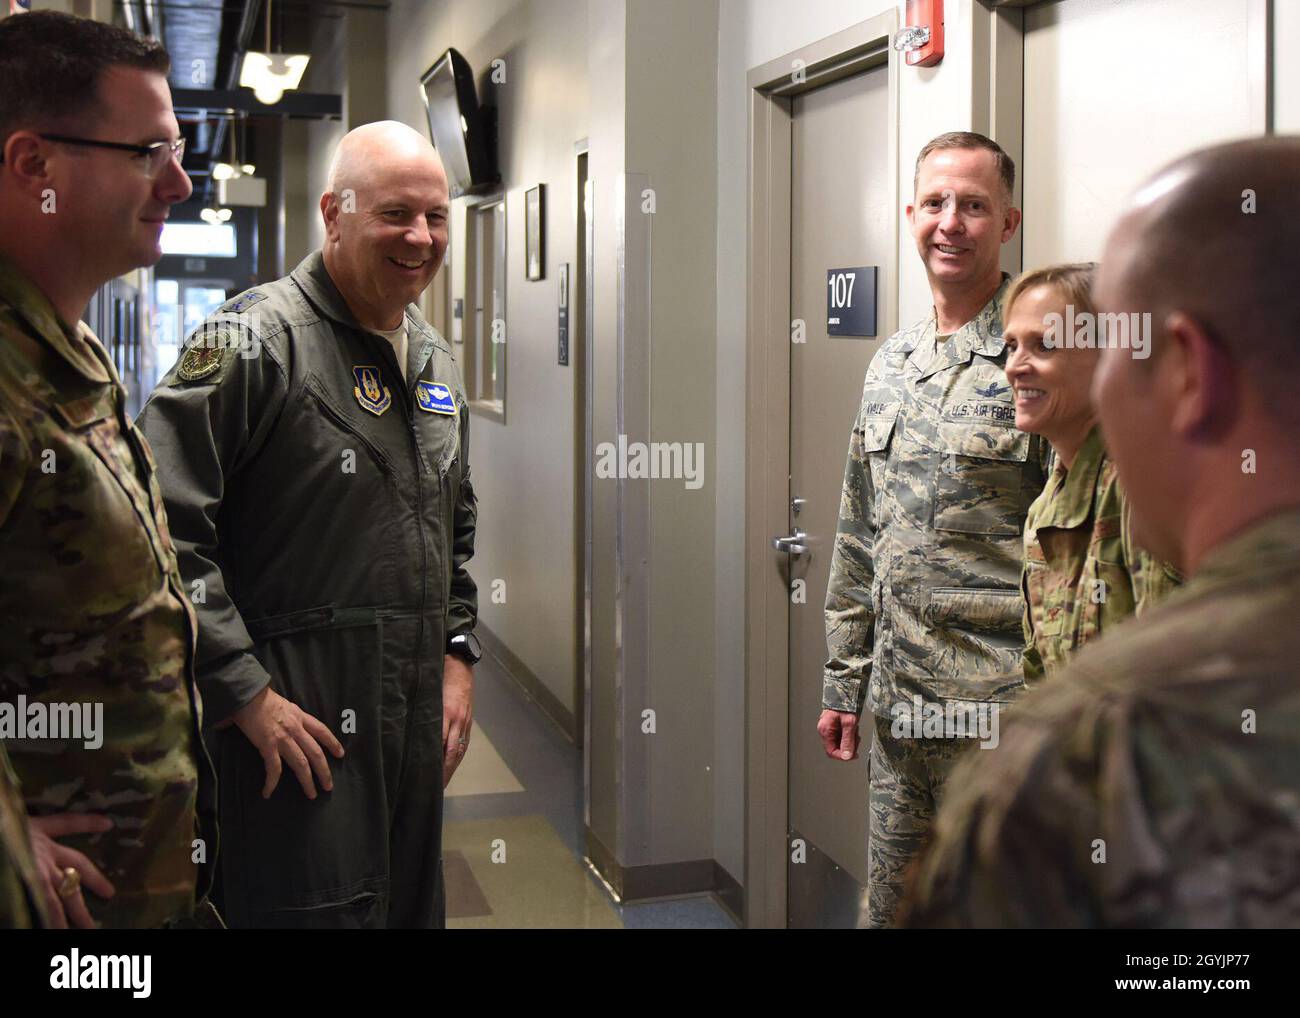 Maj. Gen. Brian Borgen, 10th Air Force commander, smiles while meeting members from the 710th Security Forces Squadron and 310th Mission Support Group at Buckley Air Force Base, Colo., Jan. 9, 2020. The 710th SFS was the last stop on a tour of units that are under Borgen’s command at Buckley. (U.S. Air Force photo by Airman 1st Class Haley N. Blevins) Stock Photo